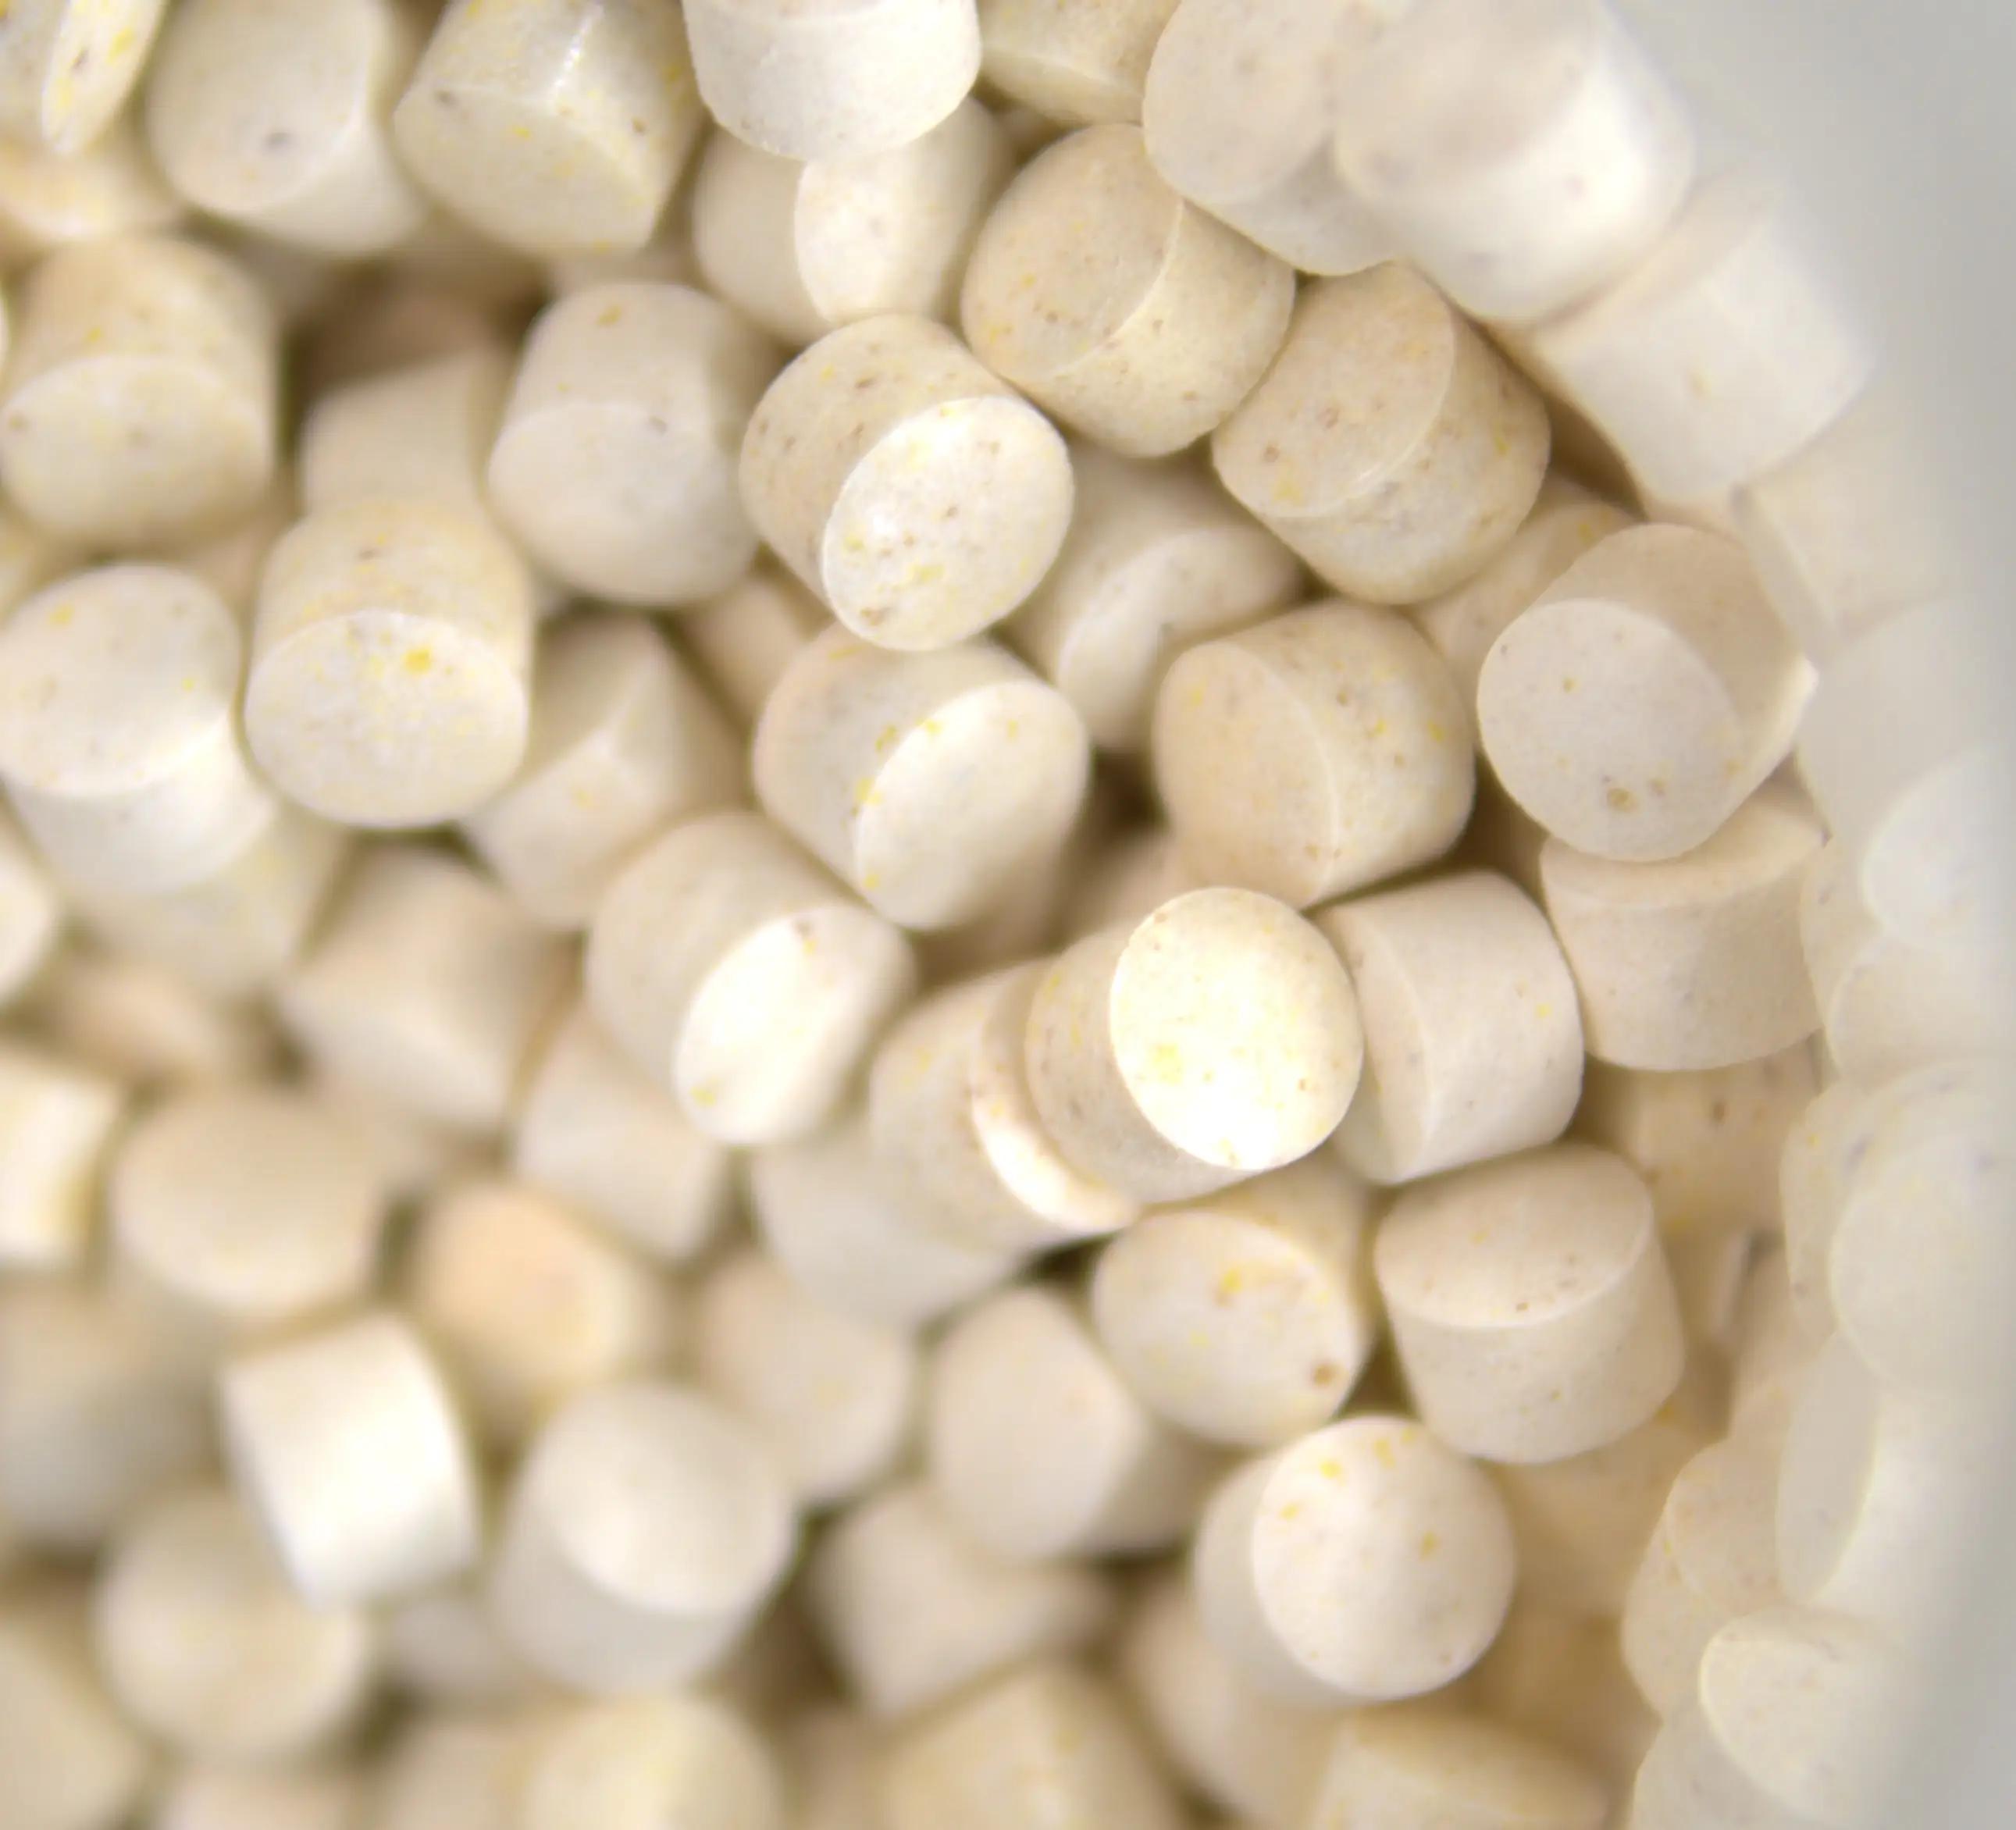 A close up of light coloured chewable tablets